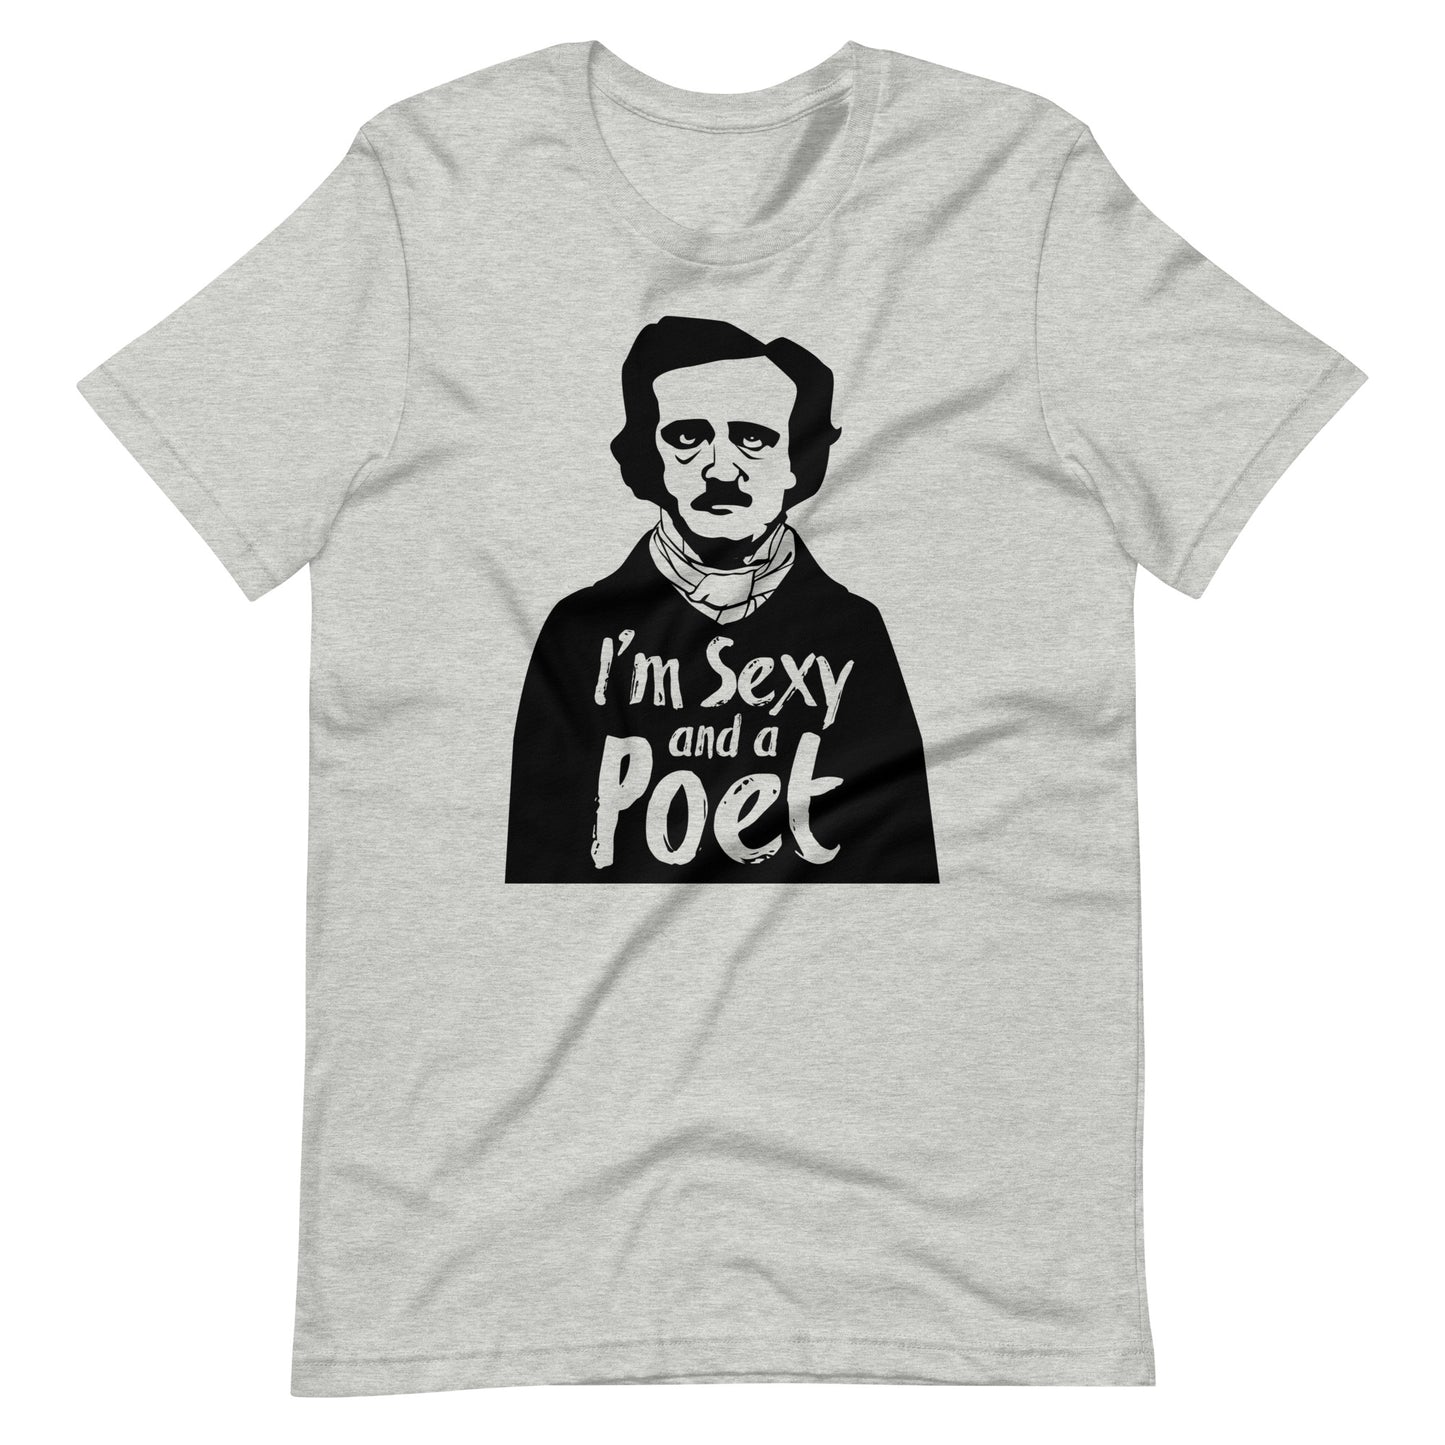 Women's Edgar Allan Poe "I'm Sexy and a Poet" t-shirt - Athletic Heather Front